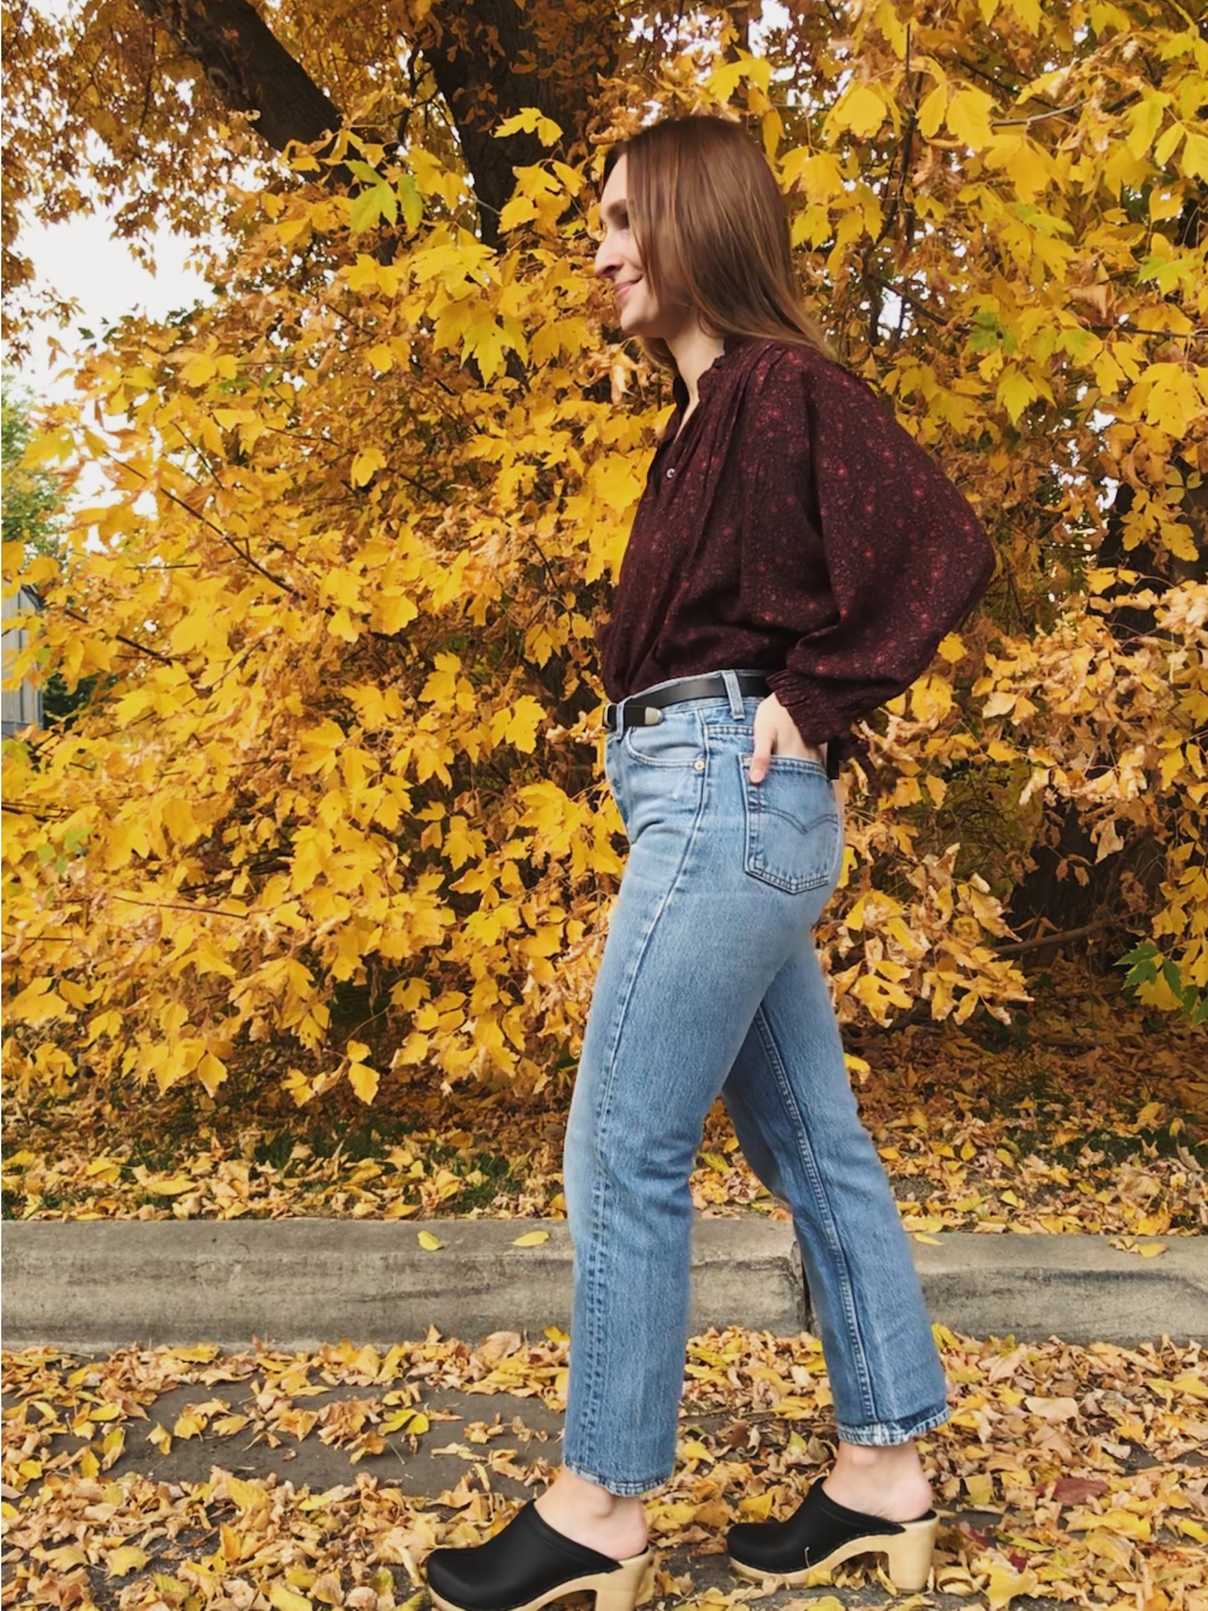 Jacqs wearing a burgundy floral blouse with vintage denim and black clogs